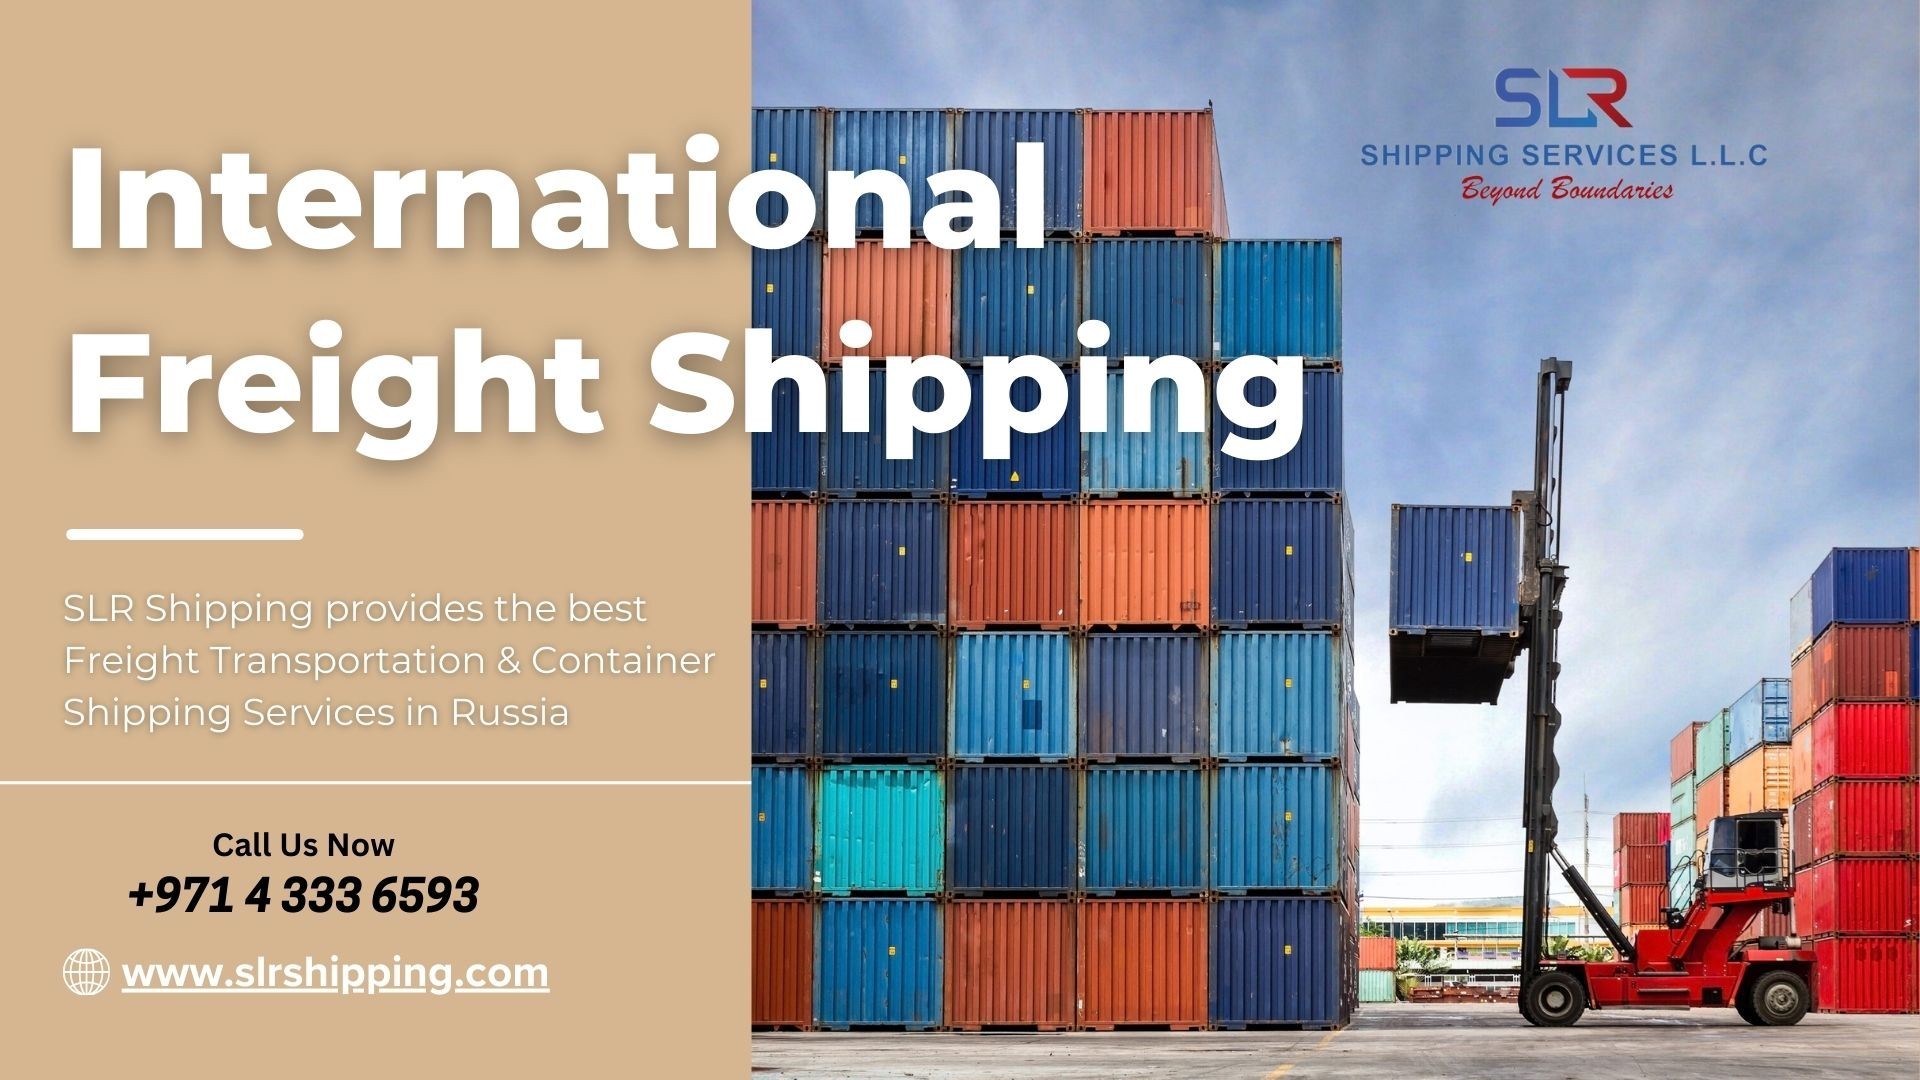 International Freight Shipping Containers